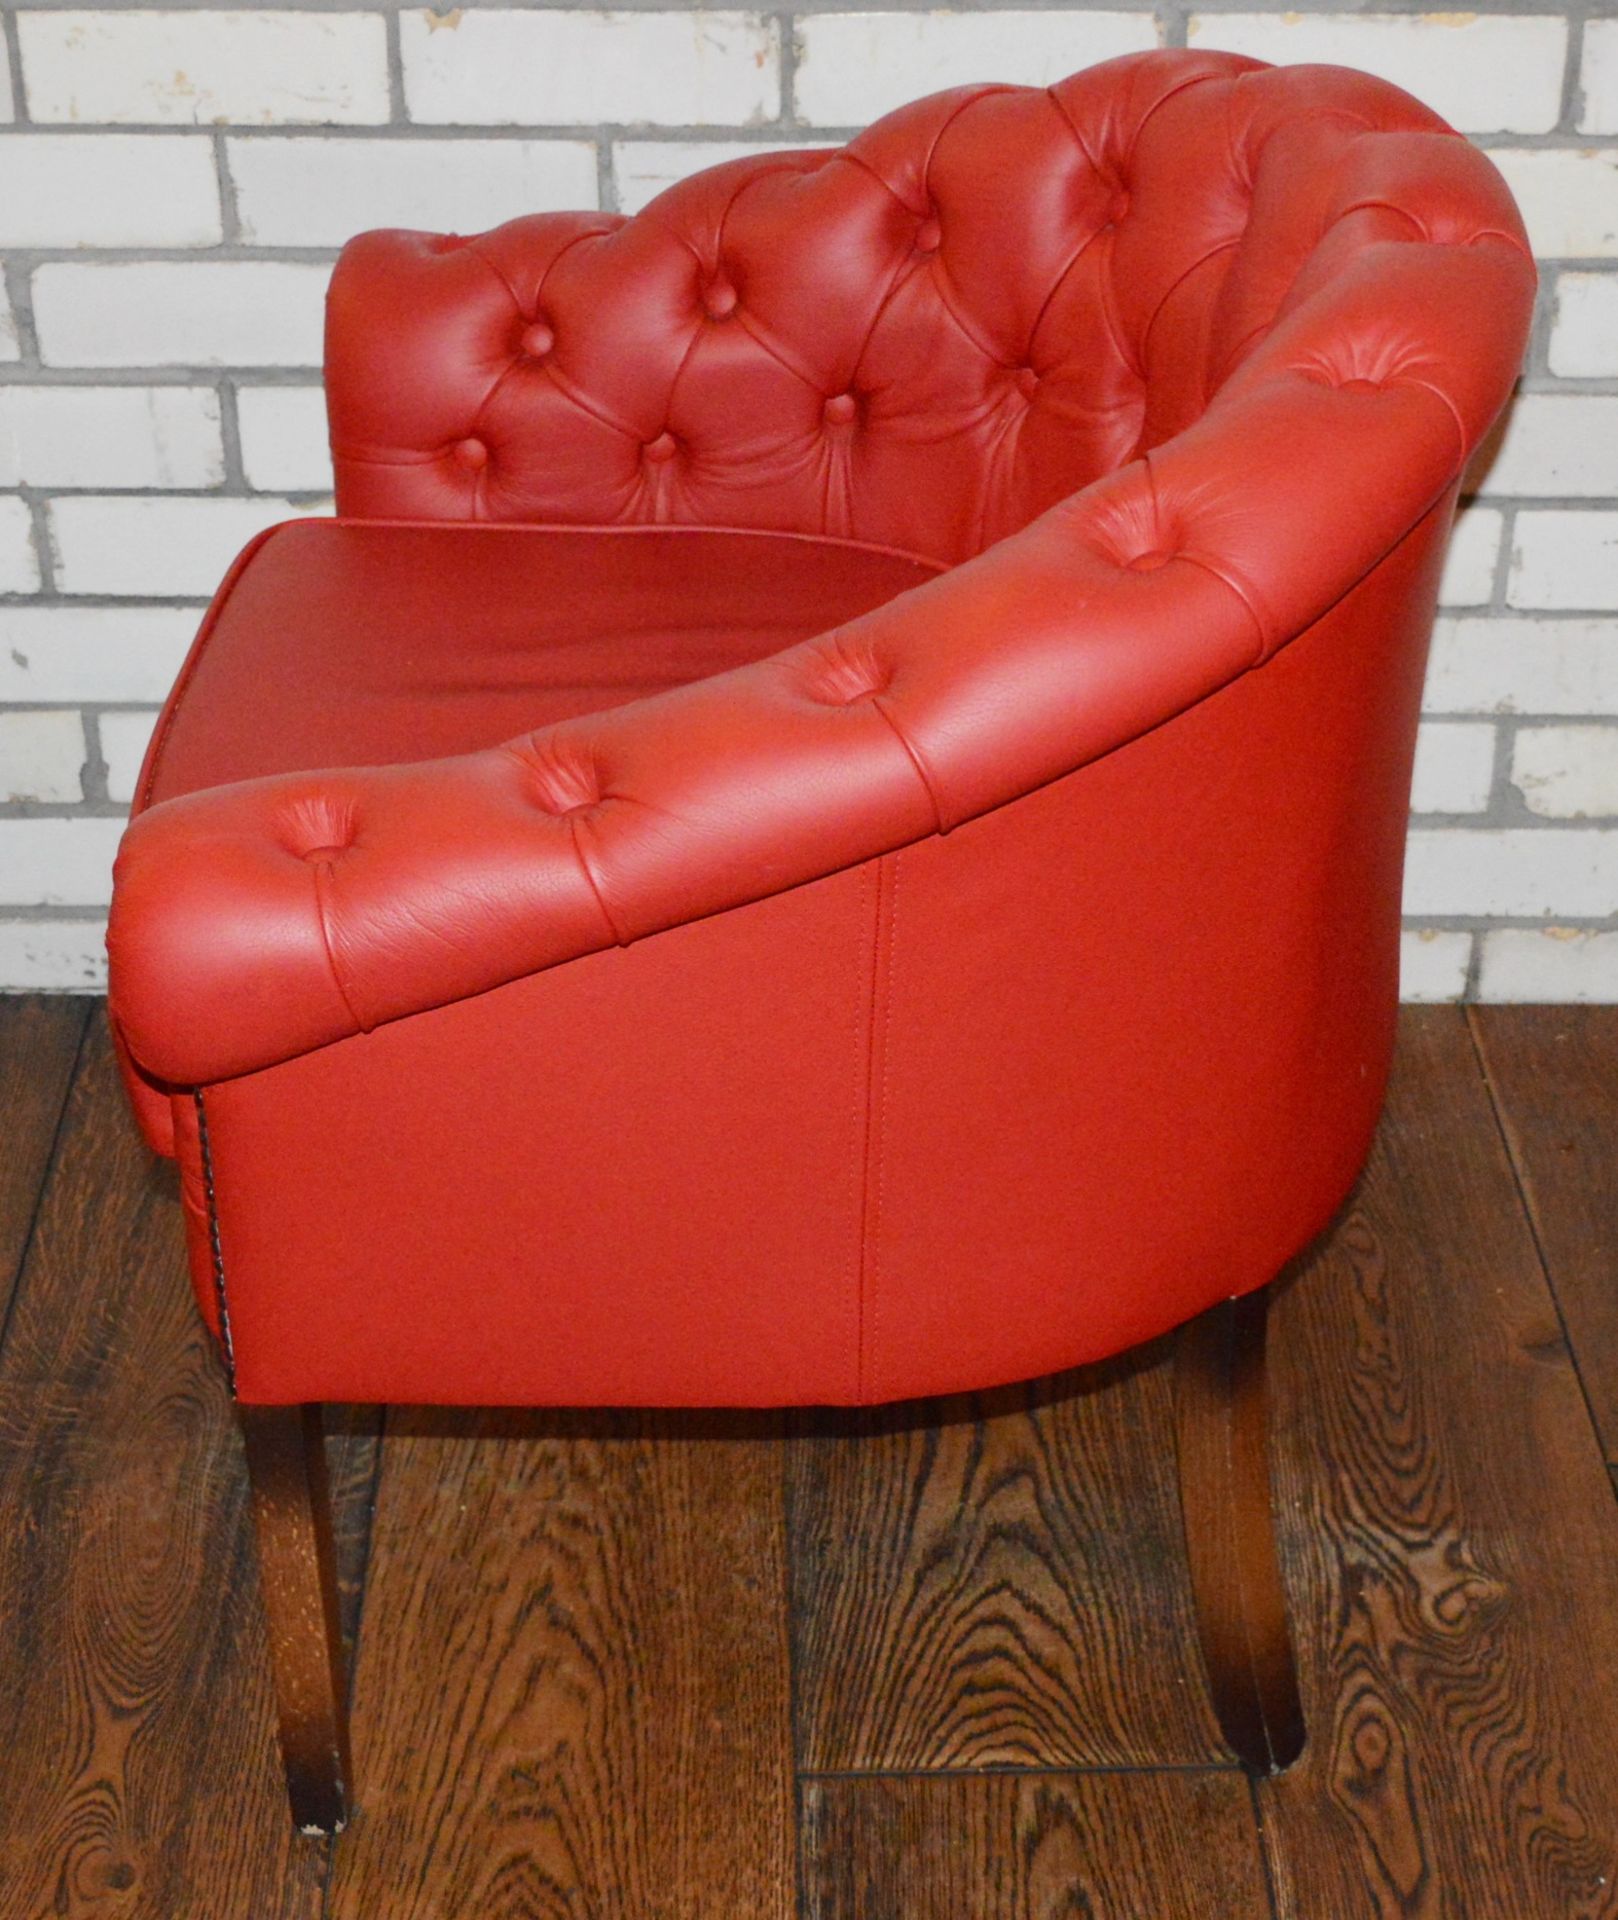 1 x Chesterfield Style Buttoned Back Red Leather Tub Chair With Hardwood Legs Finished in an - Image 2 of 8